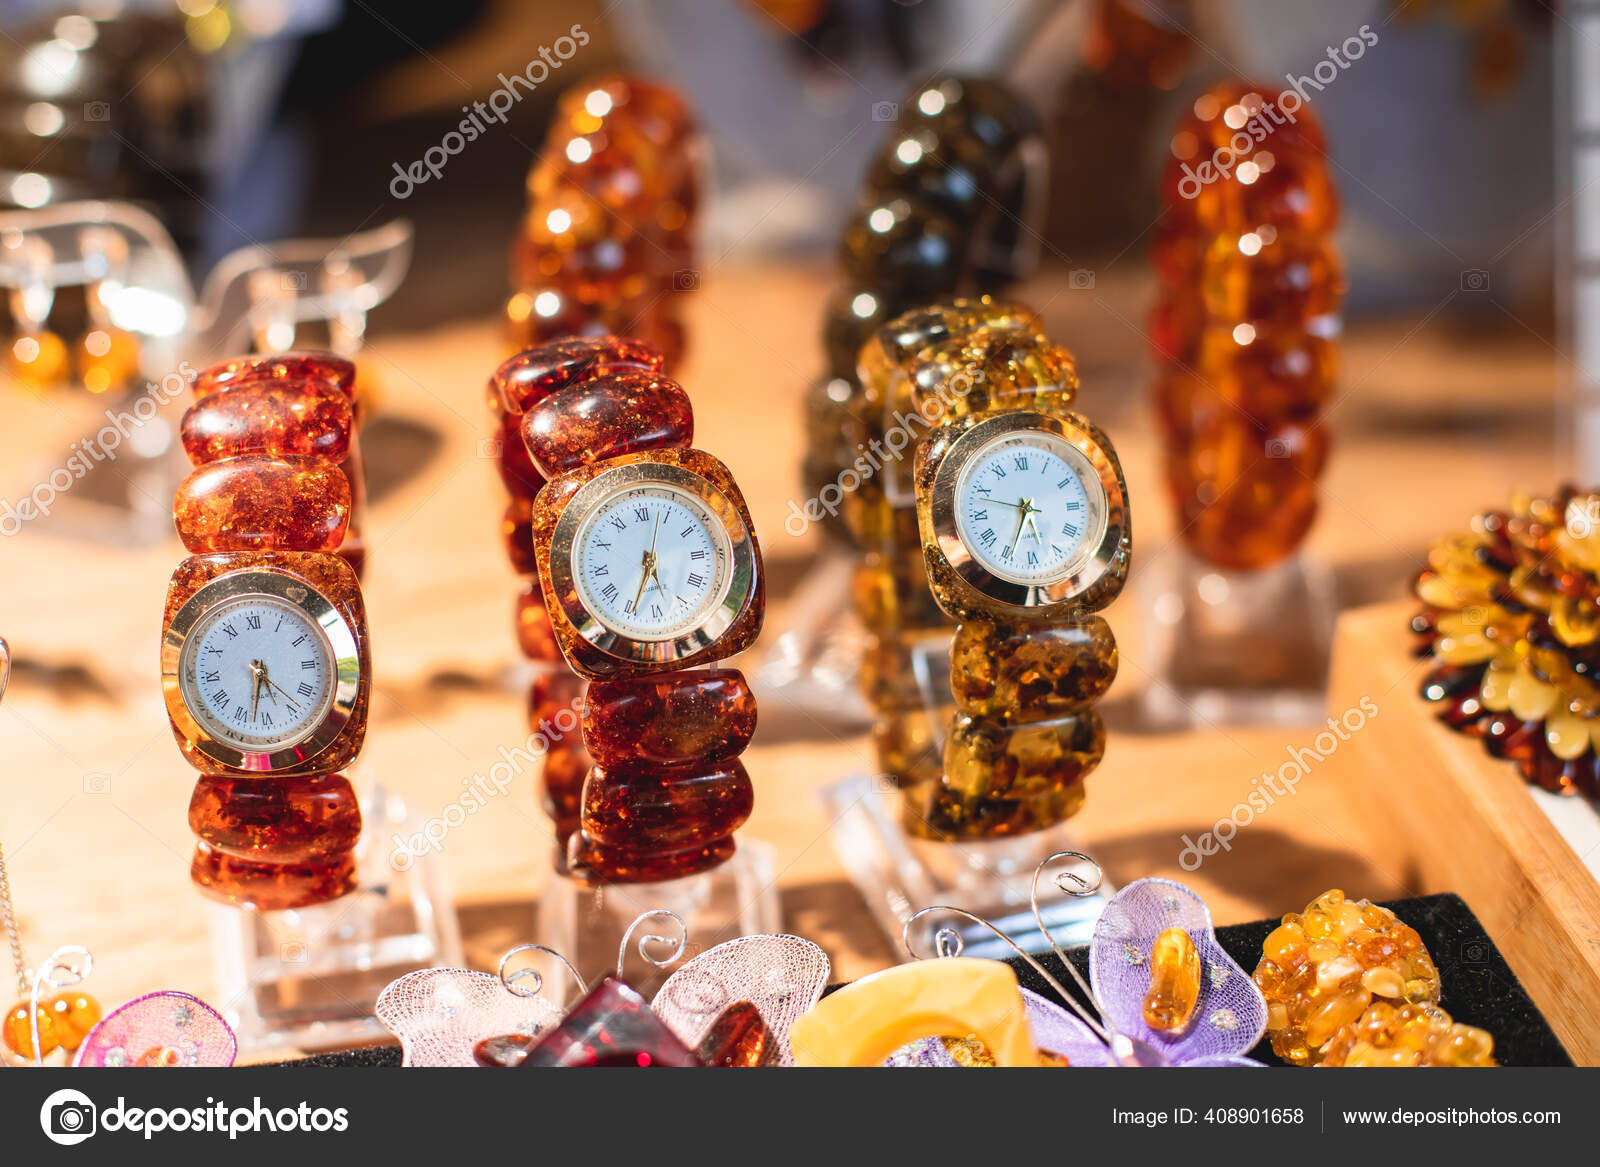 Watches, Souvenirs & Gifts